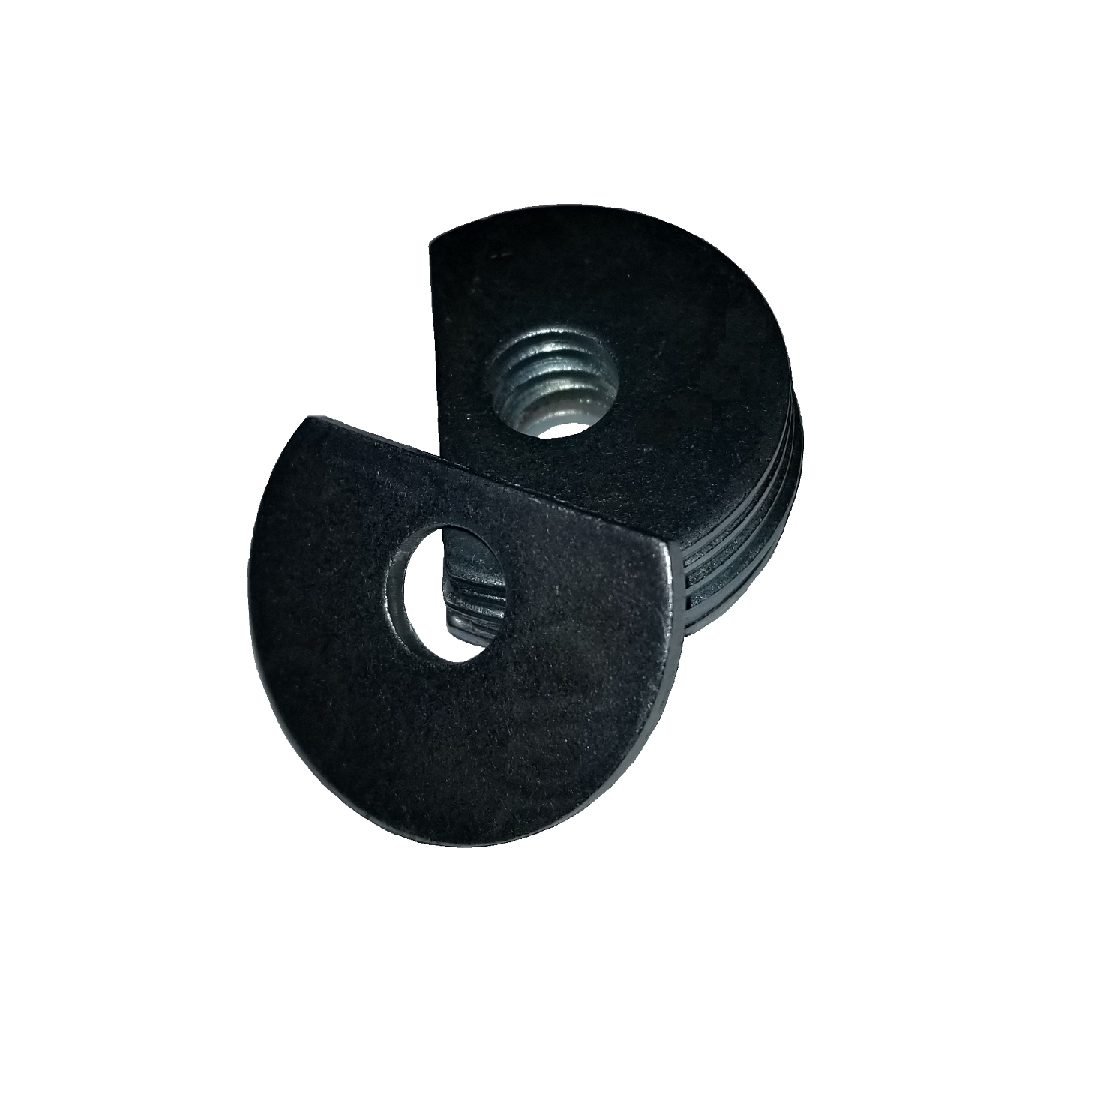 Clipped OD Washer - 0.562 ID, 1.375 OD, 0.093 Thick, Low Carbon Steel - Soft, Zinc & Clear